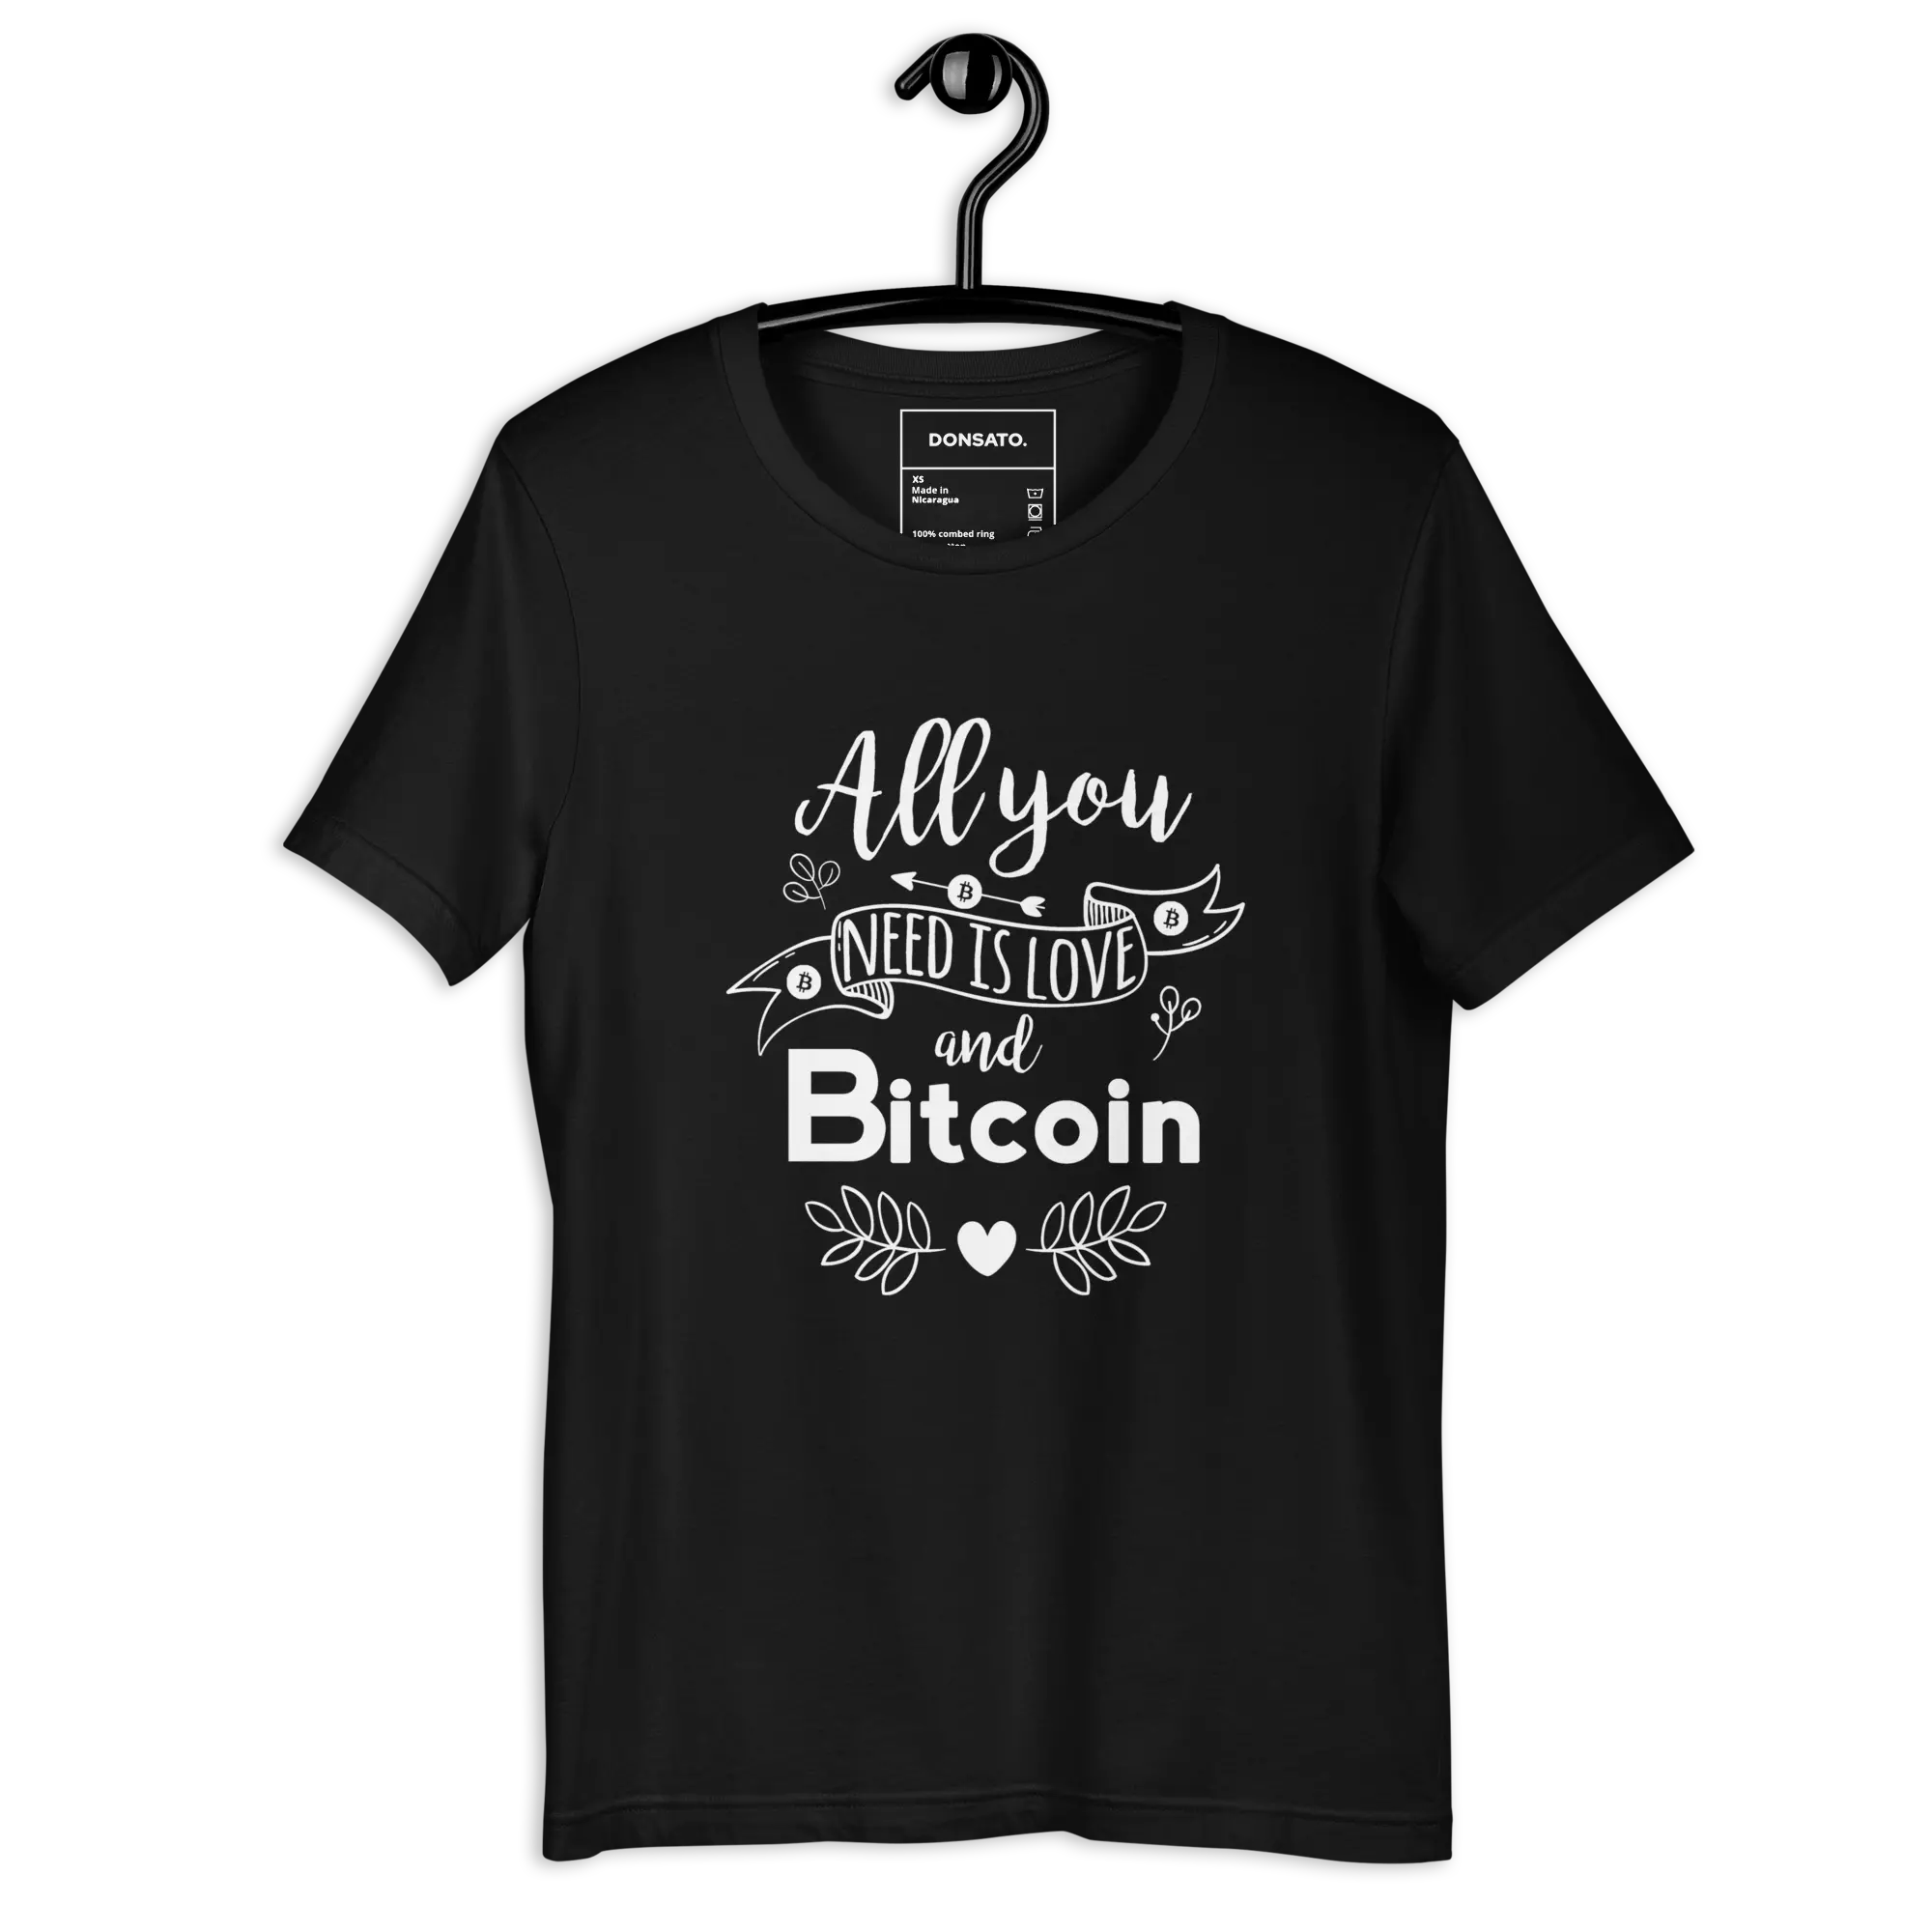 ALL YOU NEED IS LOVE AND BITCOIN T-SHIRT